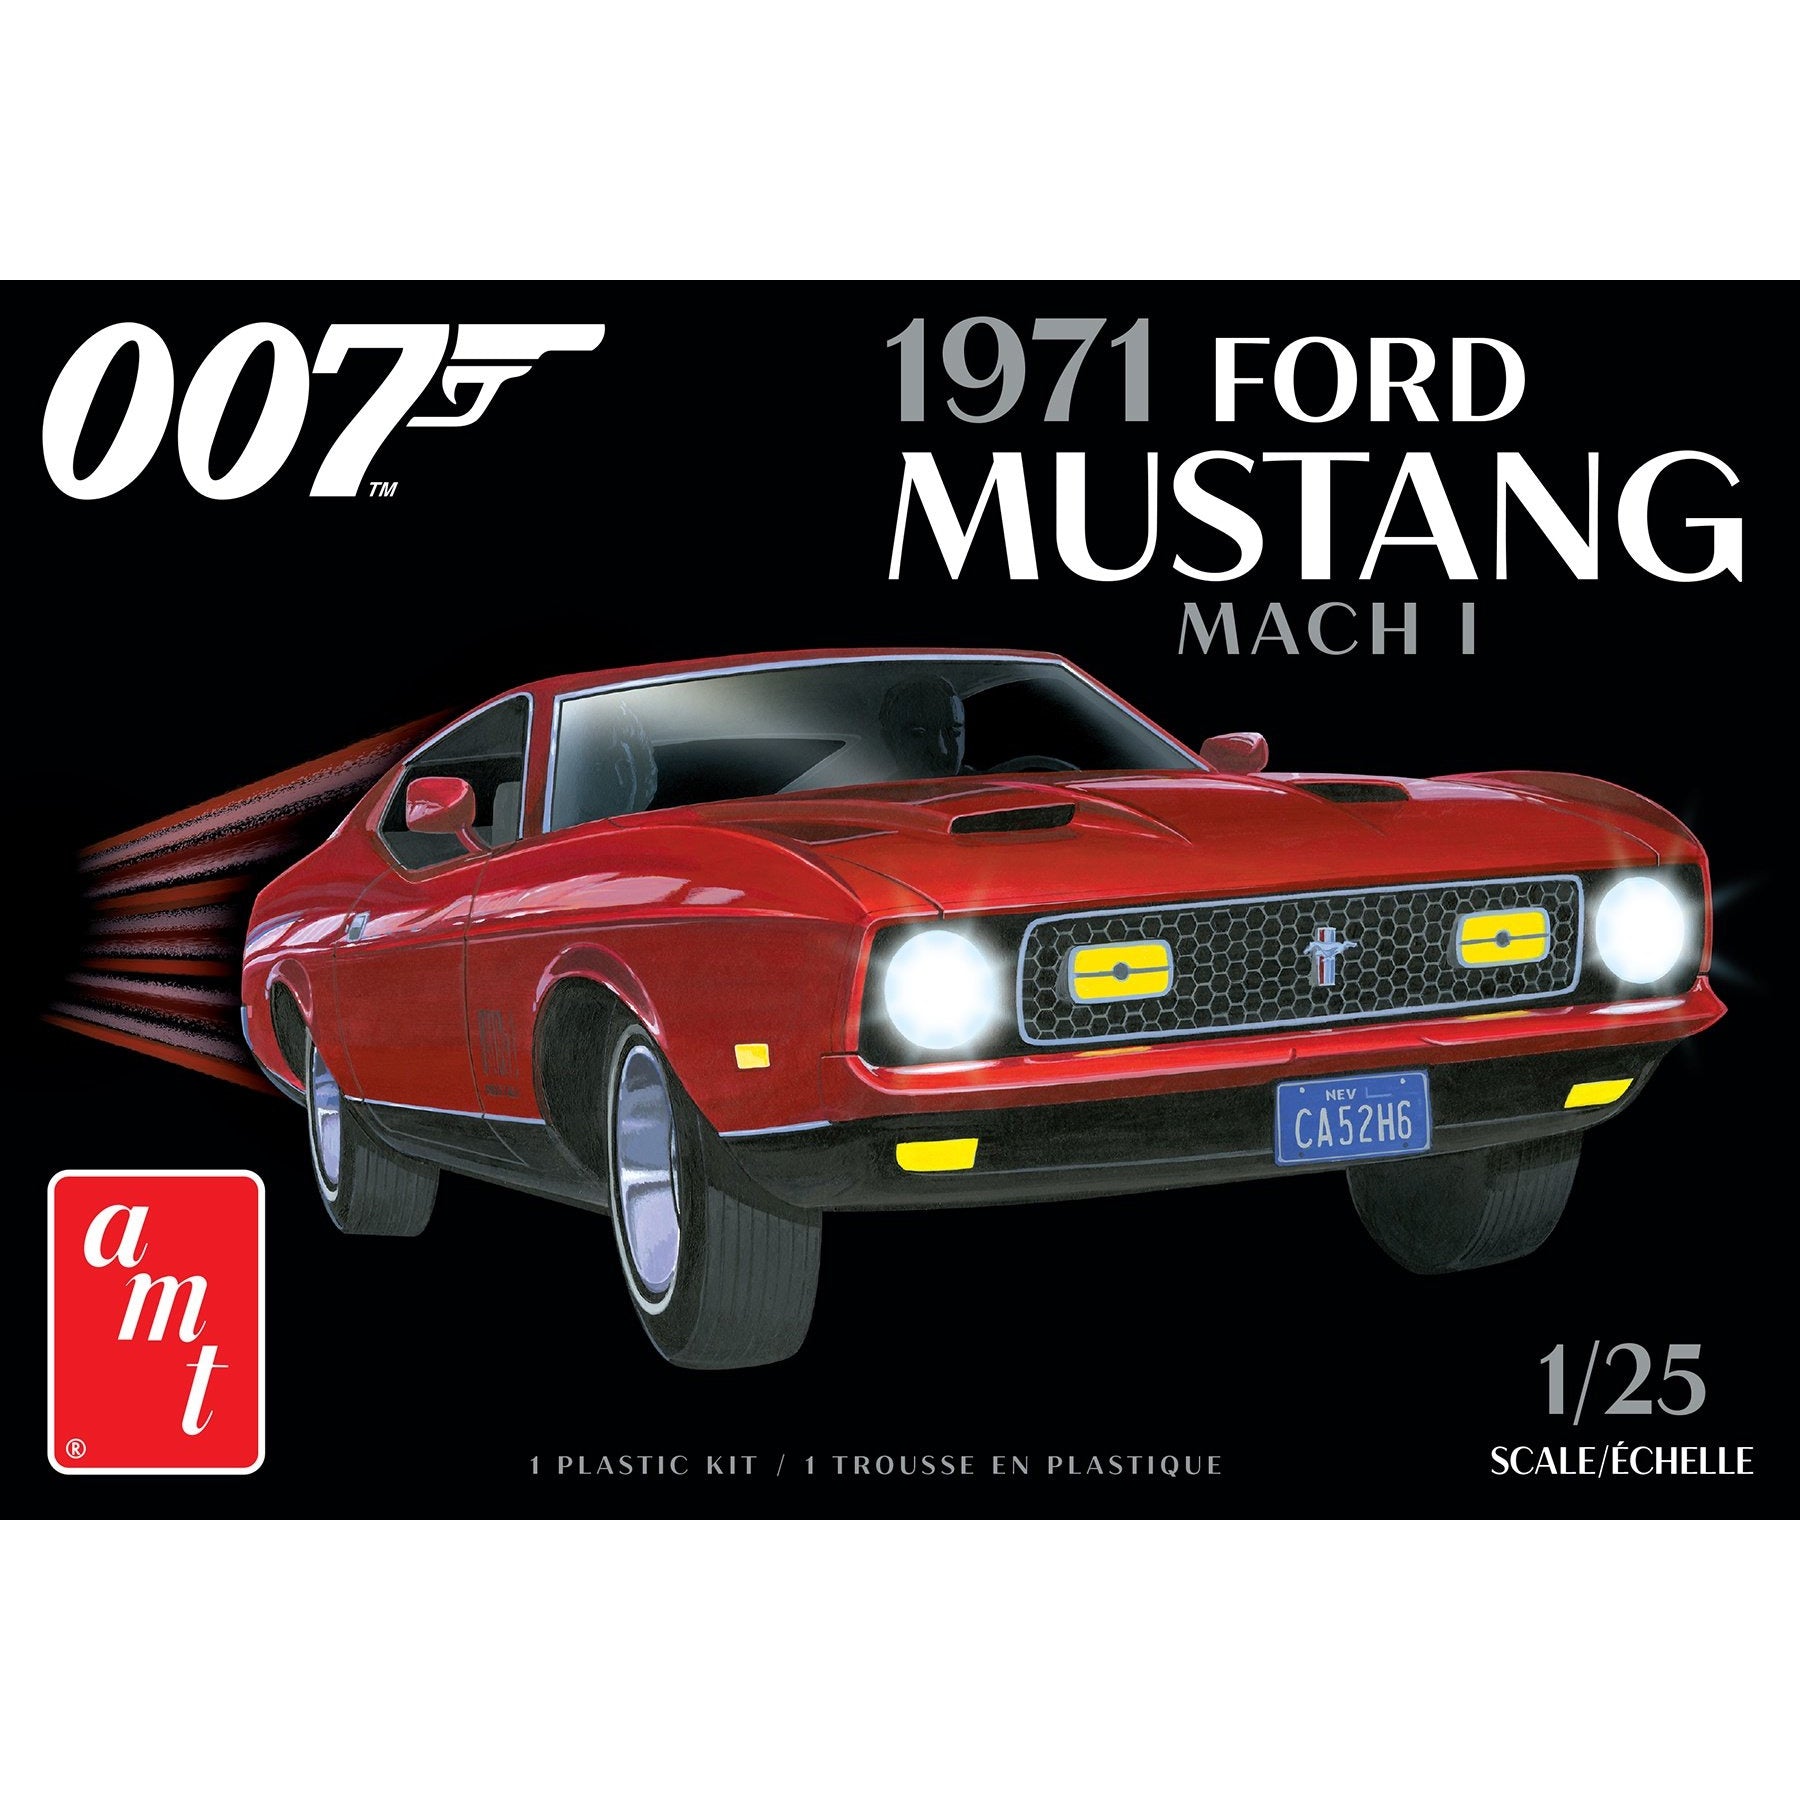 1971 007 James Bond's Ford Mustang Mach I 1/25 Model Car Kit #1187 by AMT